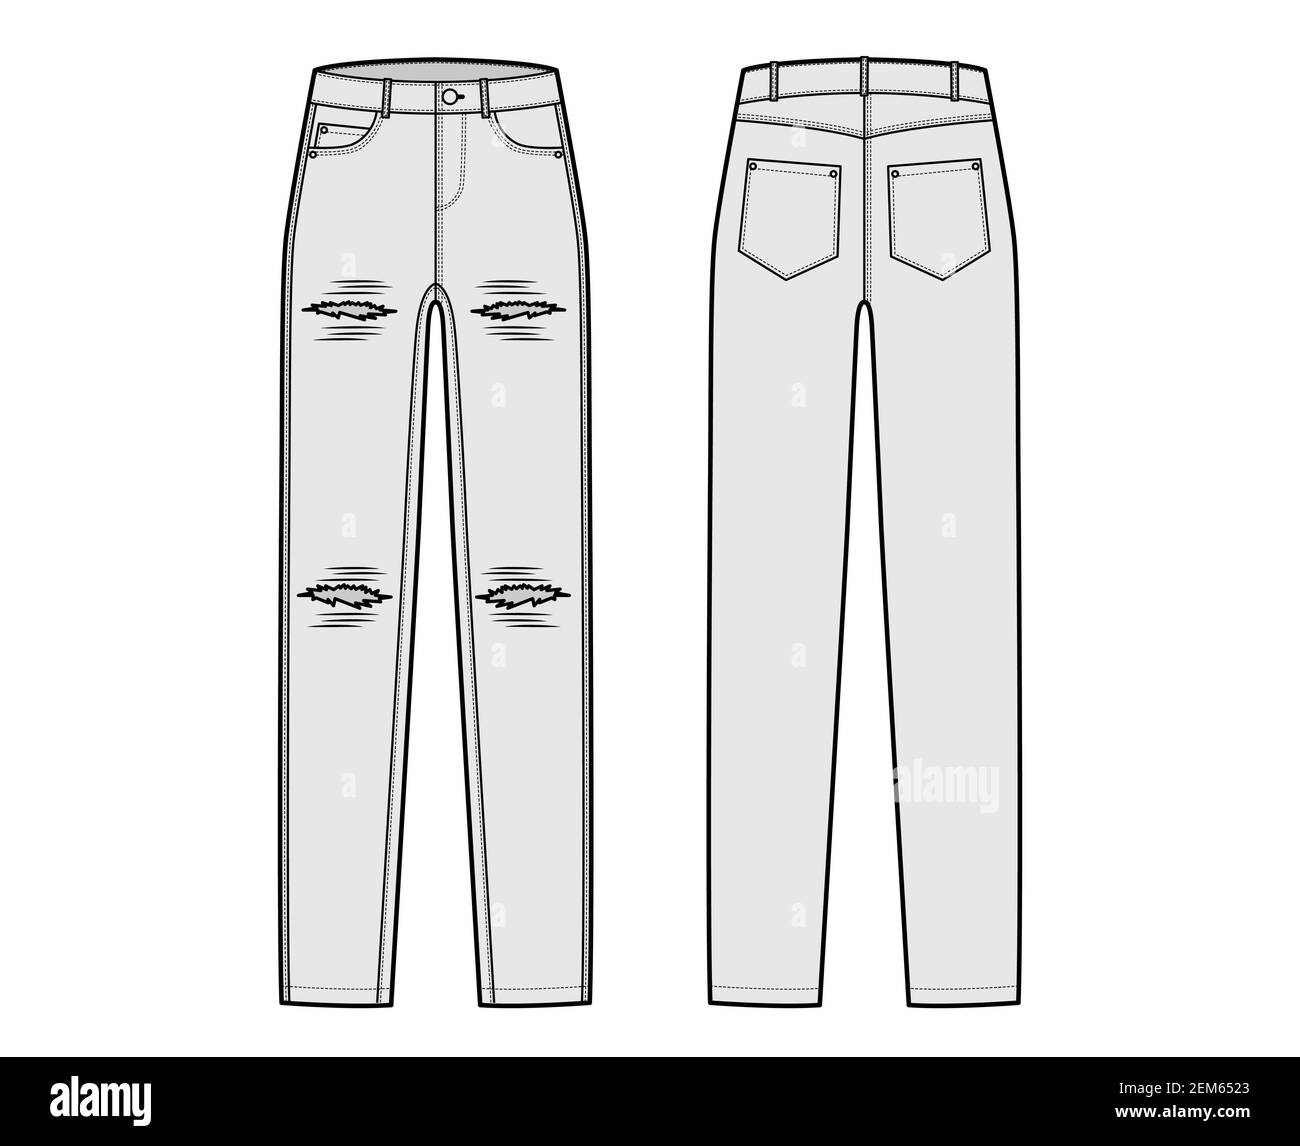 Ripped Jeans distressed Denim pants technical fashion illustration with ...